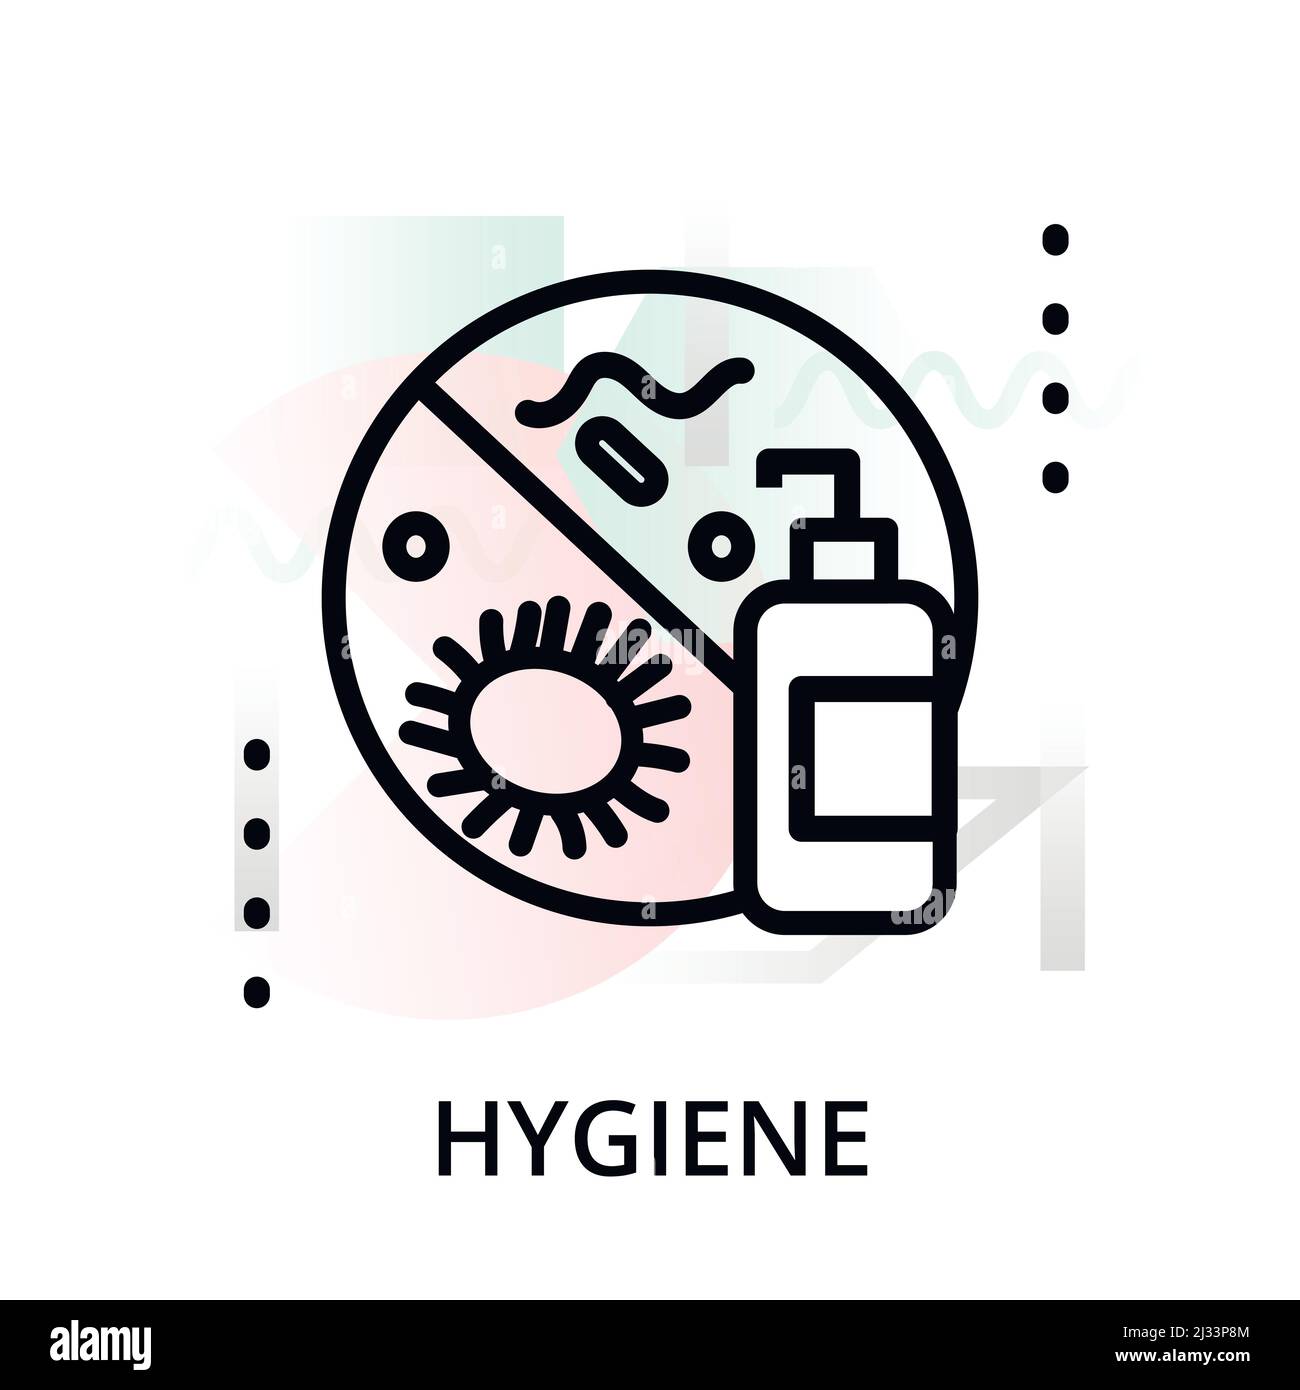 Modern flat editable line design vector illustration, concept of hygiene icon on abstract background, for graphic and web design Stock Vector